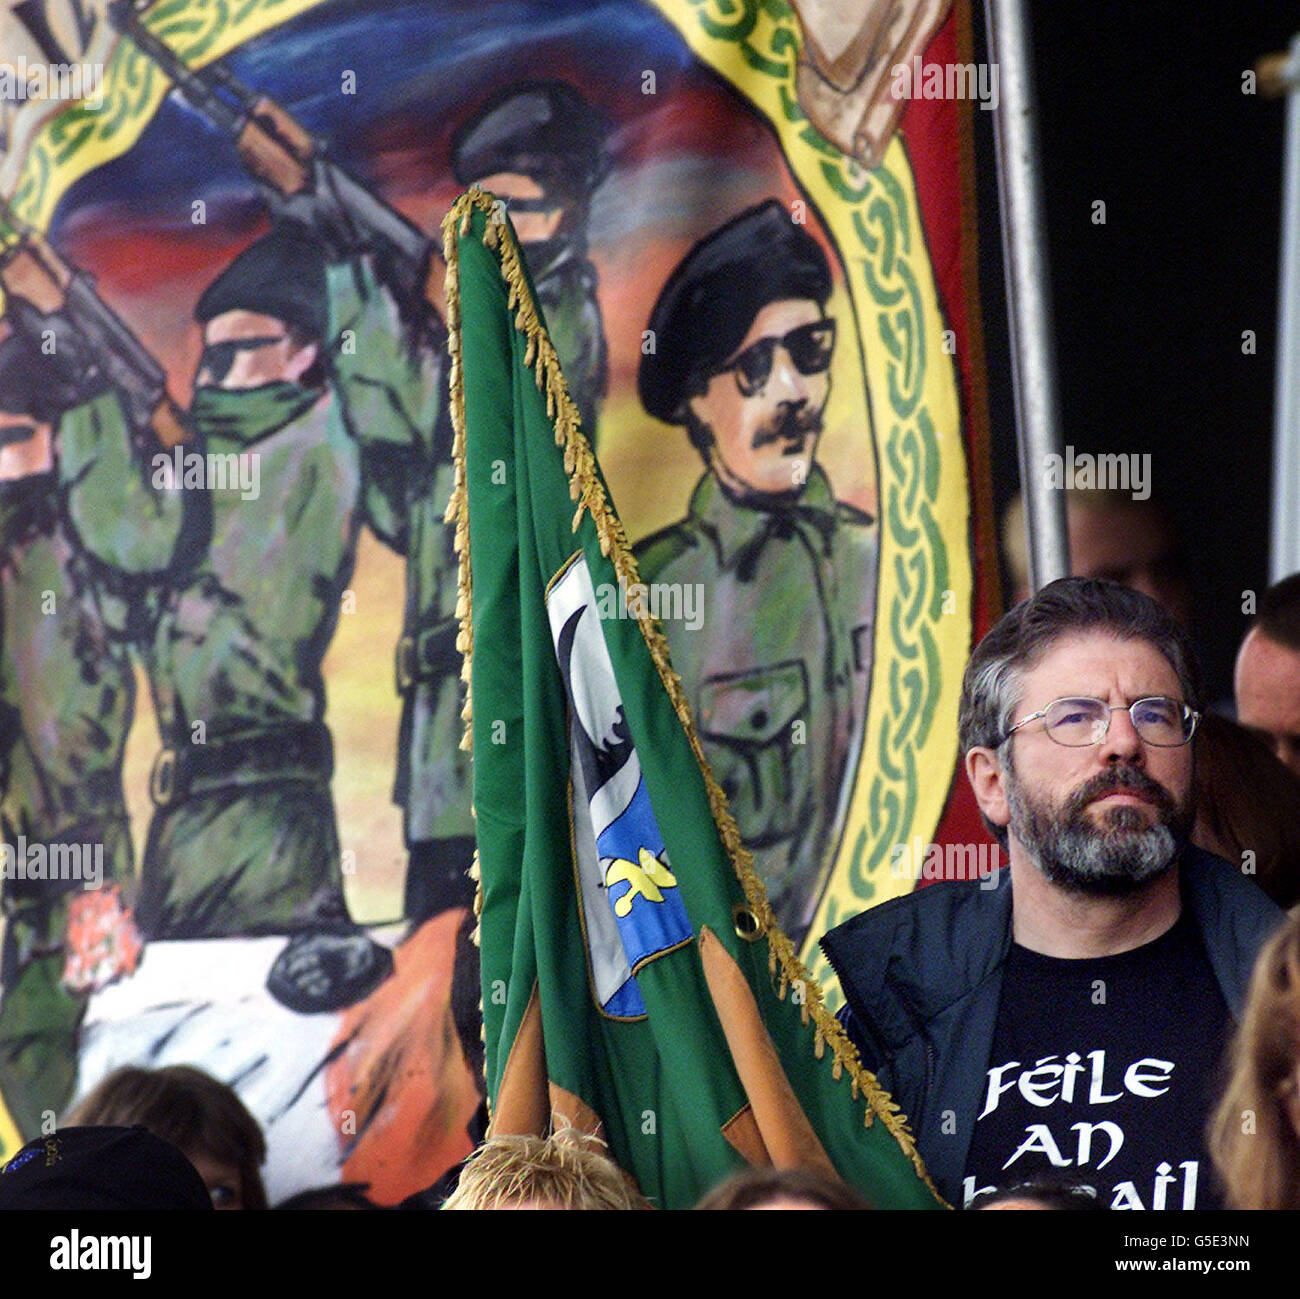 Sinn Fein President Gerry Adams beside a banner depicting IRA men firing a volley of shots over the coffin of a Hunger Striker. Adams, was attending a Republican rally in west Belfast, to commerate the 20th anniversary of the hunger strikes in the H-blocks. *Speaking at the rally, Mr Adams annouced he will not allow the Government to resolve outstanding issues in the peace process on its own or unionist terms. Stock Photo